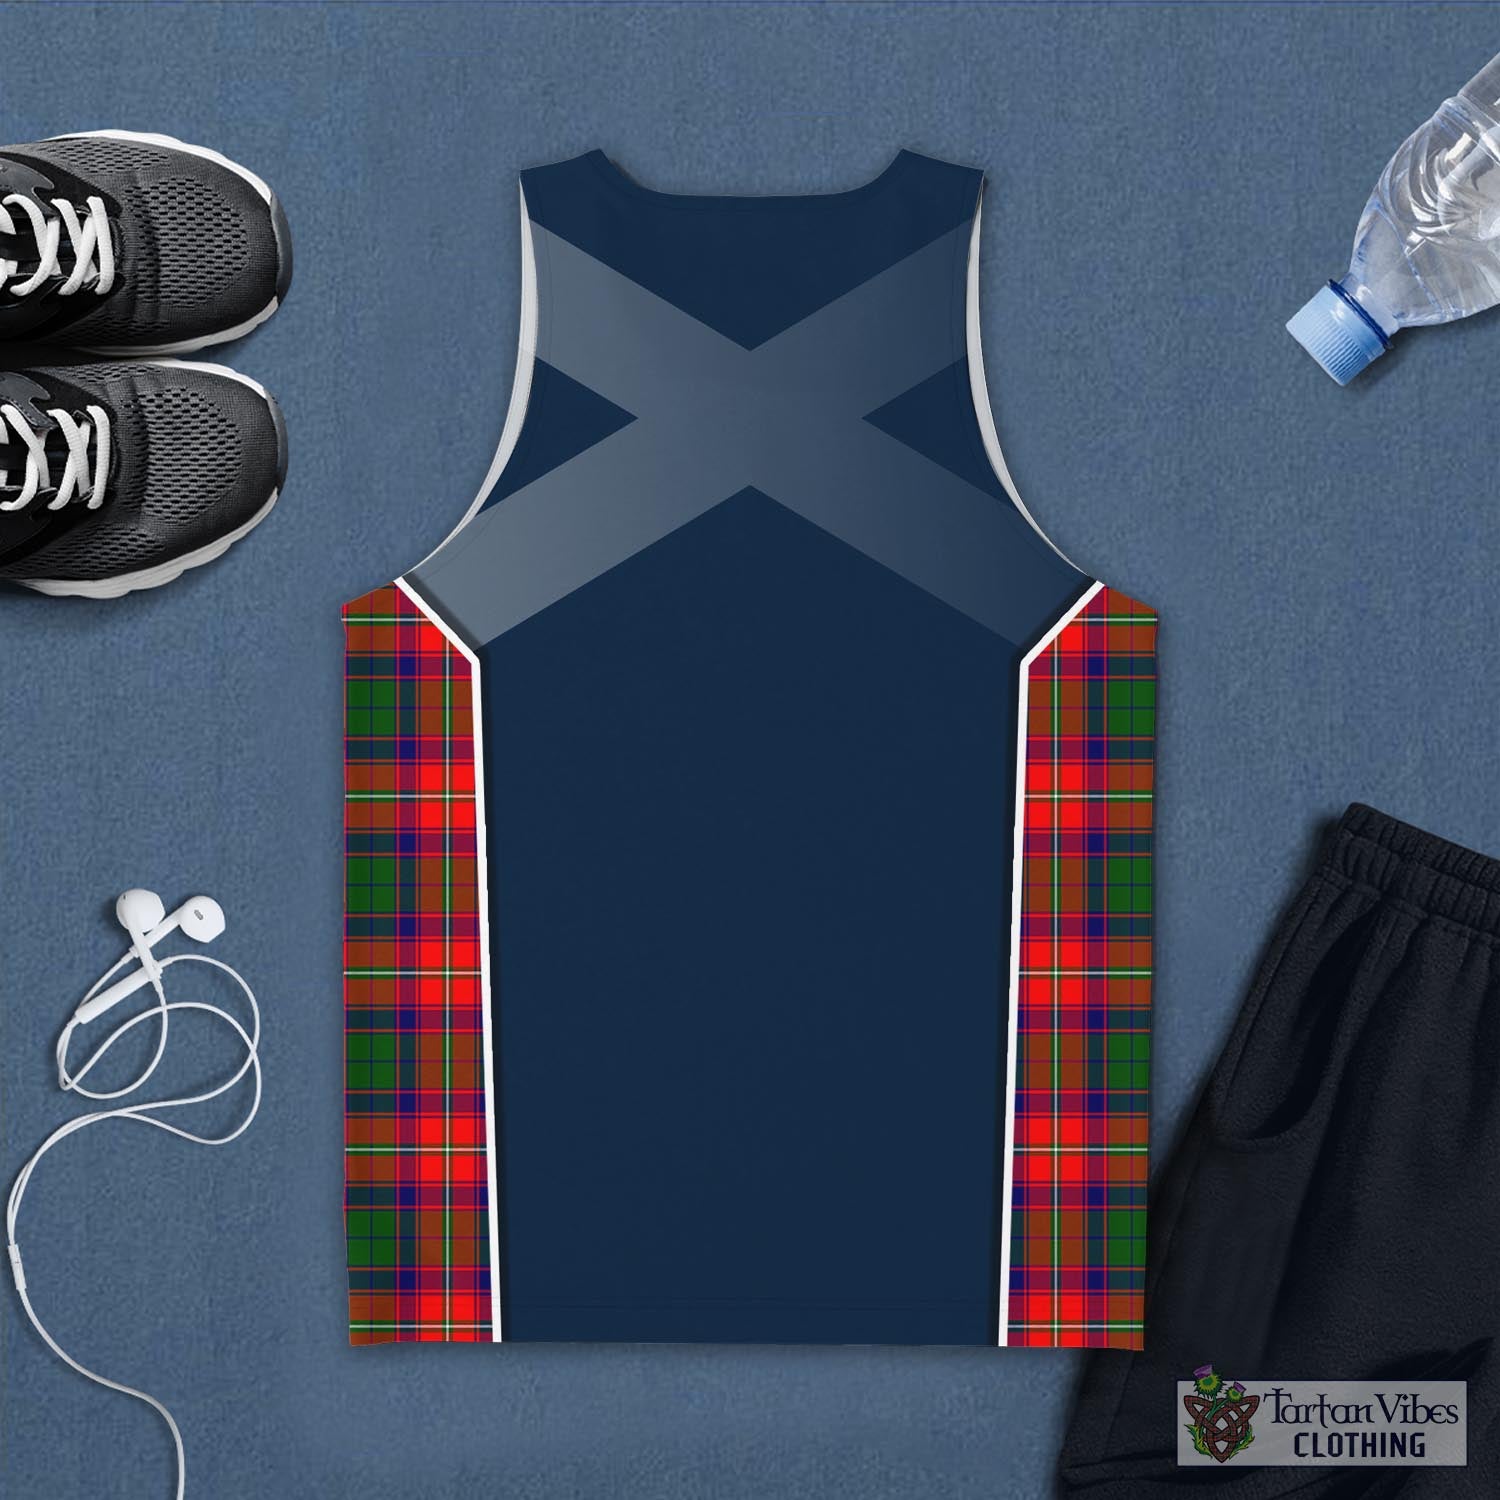 Tartan Vibes Clothing Wauchope Tartan Men's Tanks Top with Family Crest and Scottish Thistle Vibes Sport Style